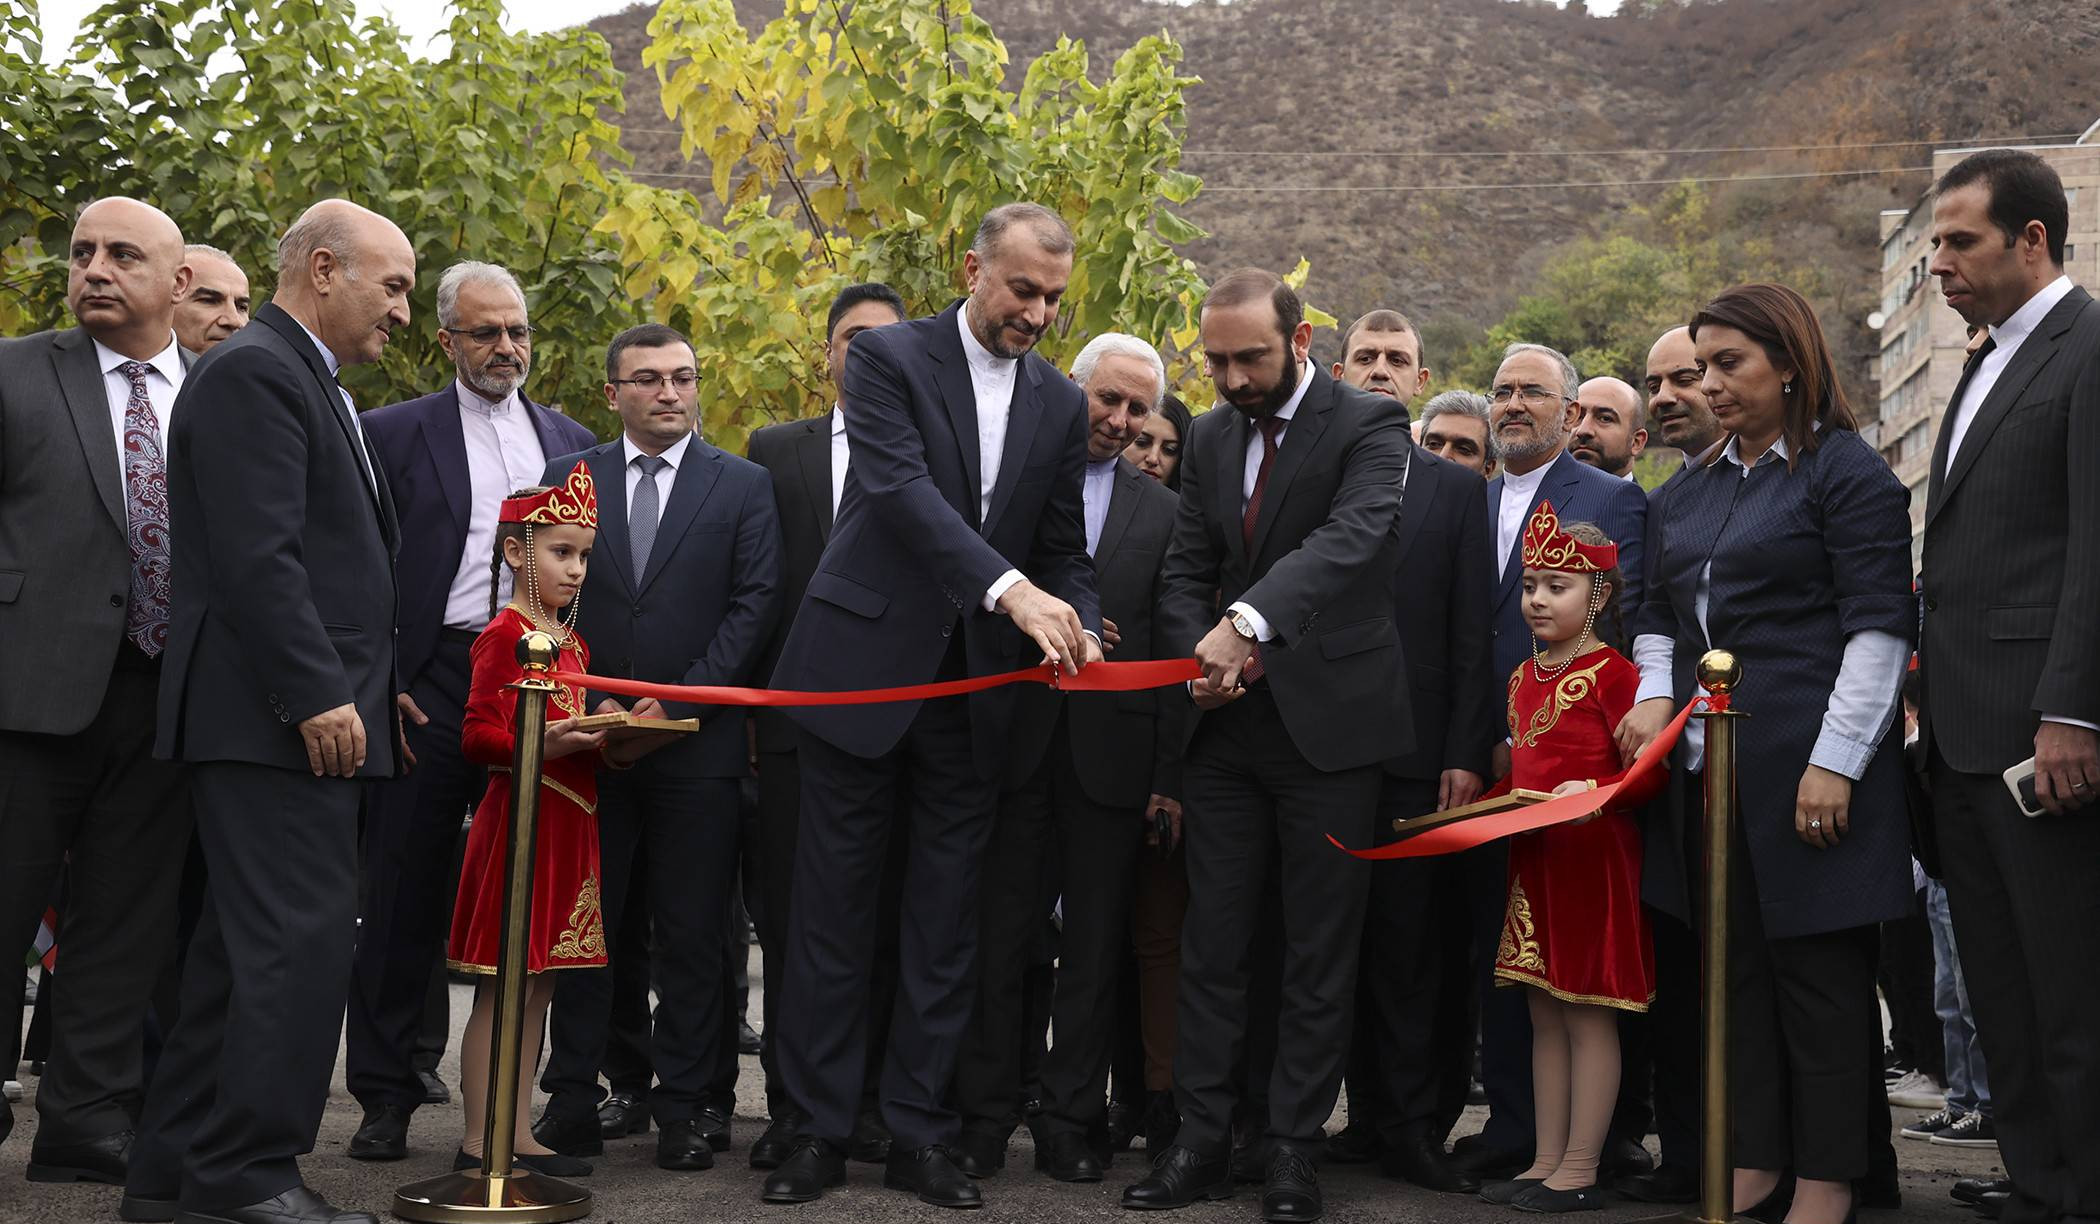 Opening ceremony of Consulate General of Islamic Republic of Iran in Kapan